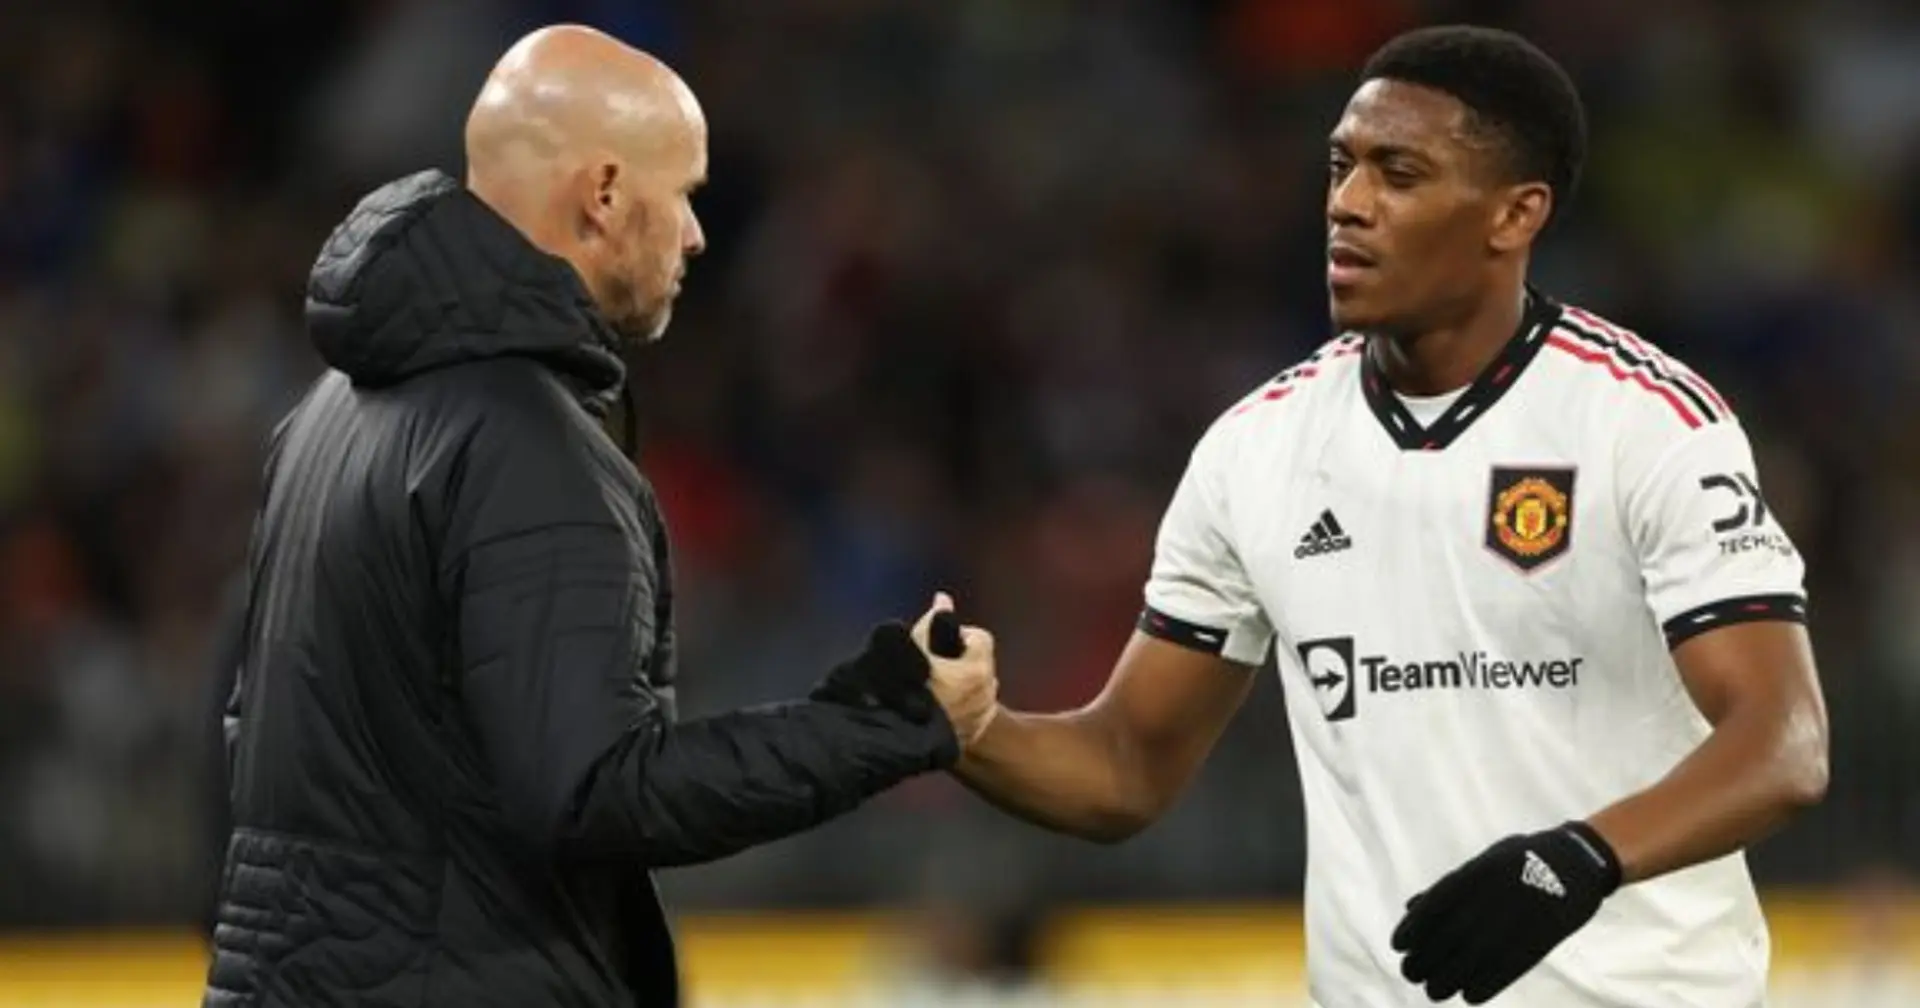 Ten Hag to be 'careful' with Martial & 3 more big Man United stories you might've missed